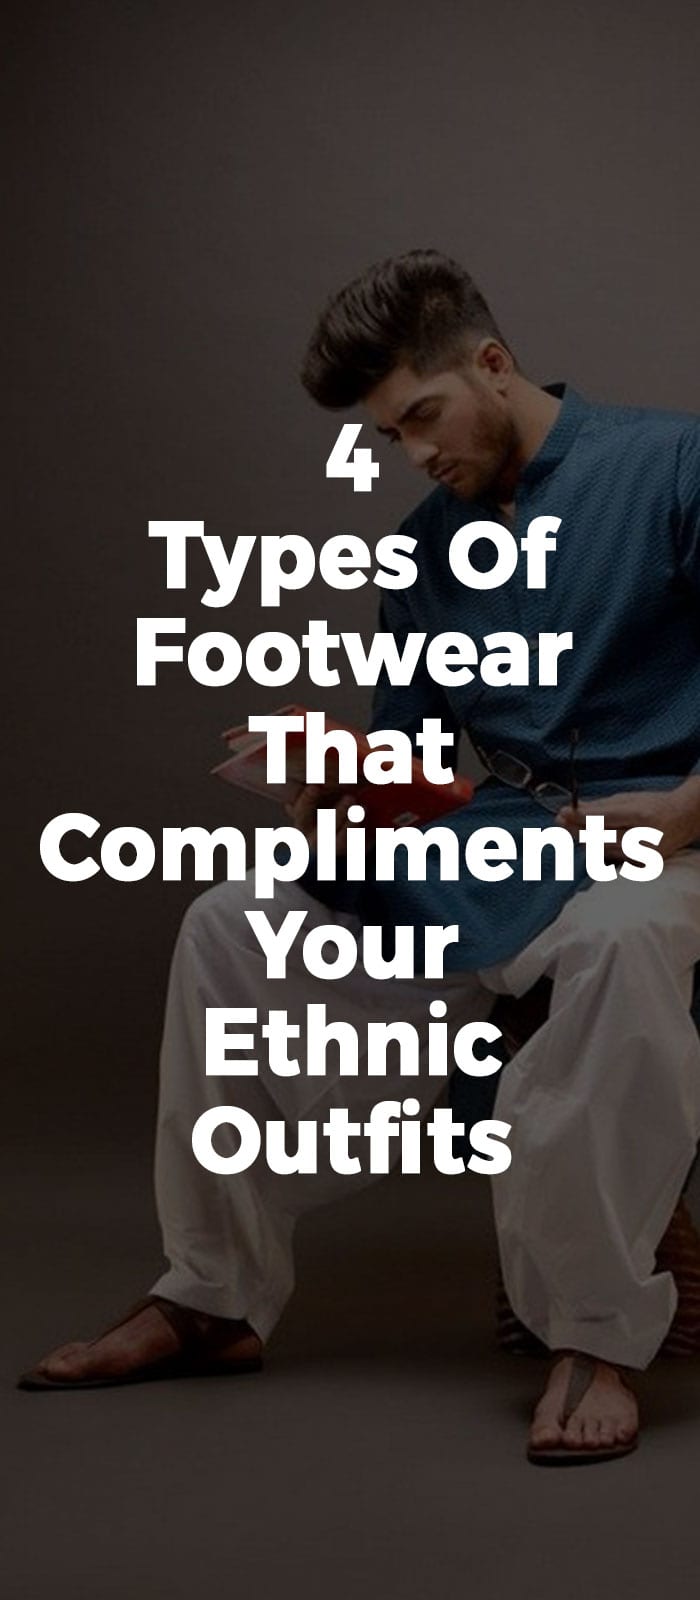 4 Types Of Footwear That Compliments Your Ethnic Outfits